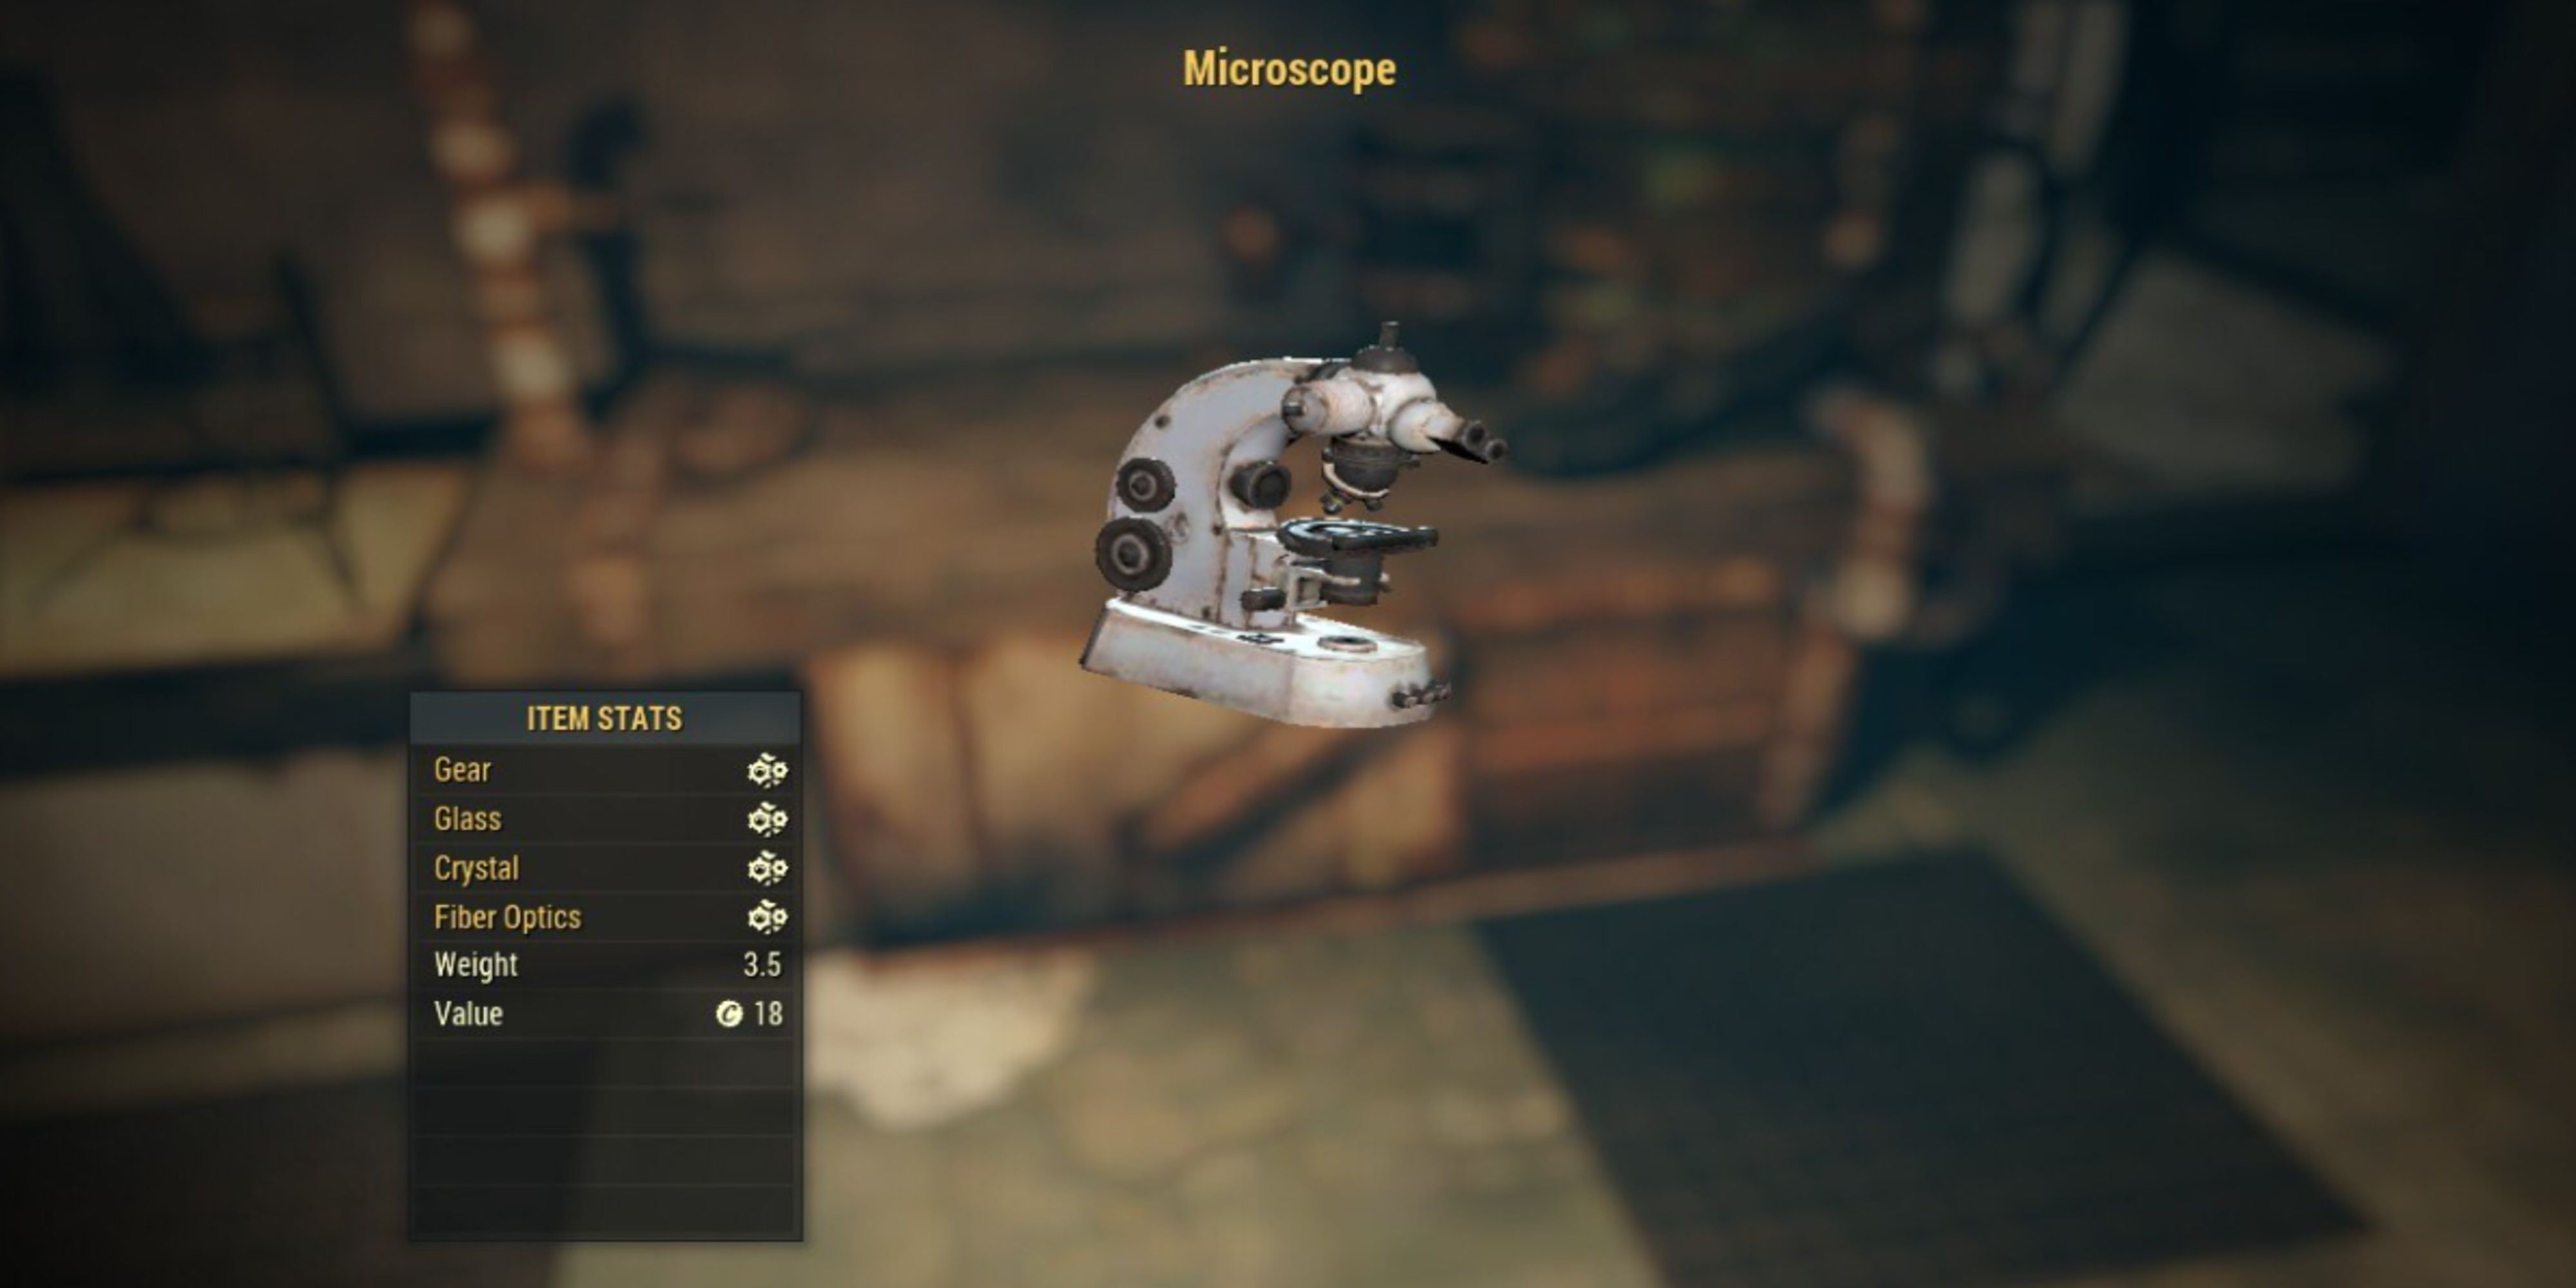 Scrapping a stack of Microscopes to obtain Fiber Optics in Fallout 76